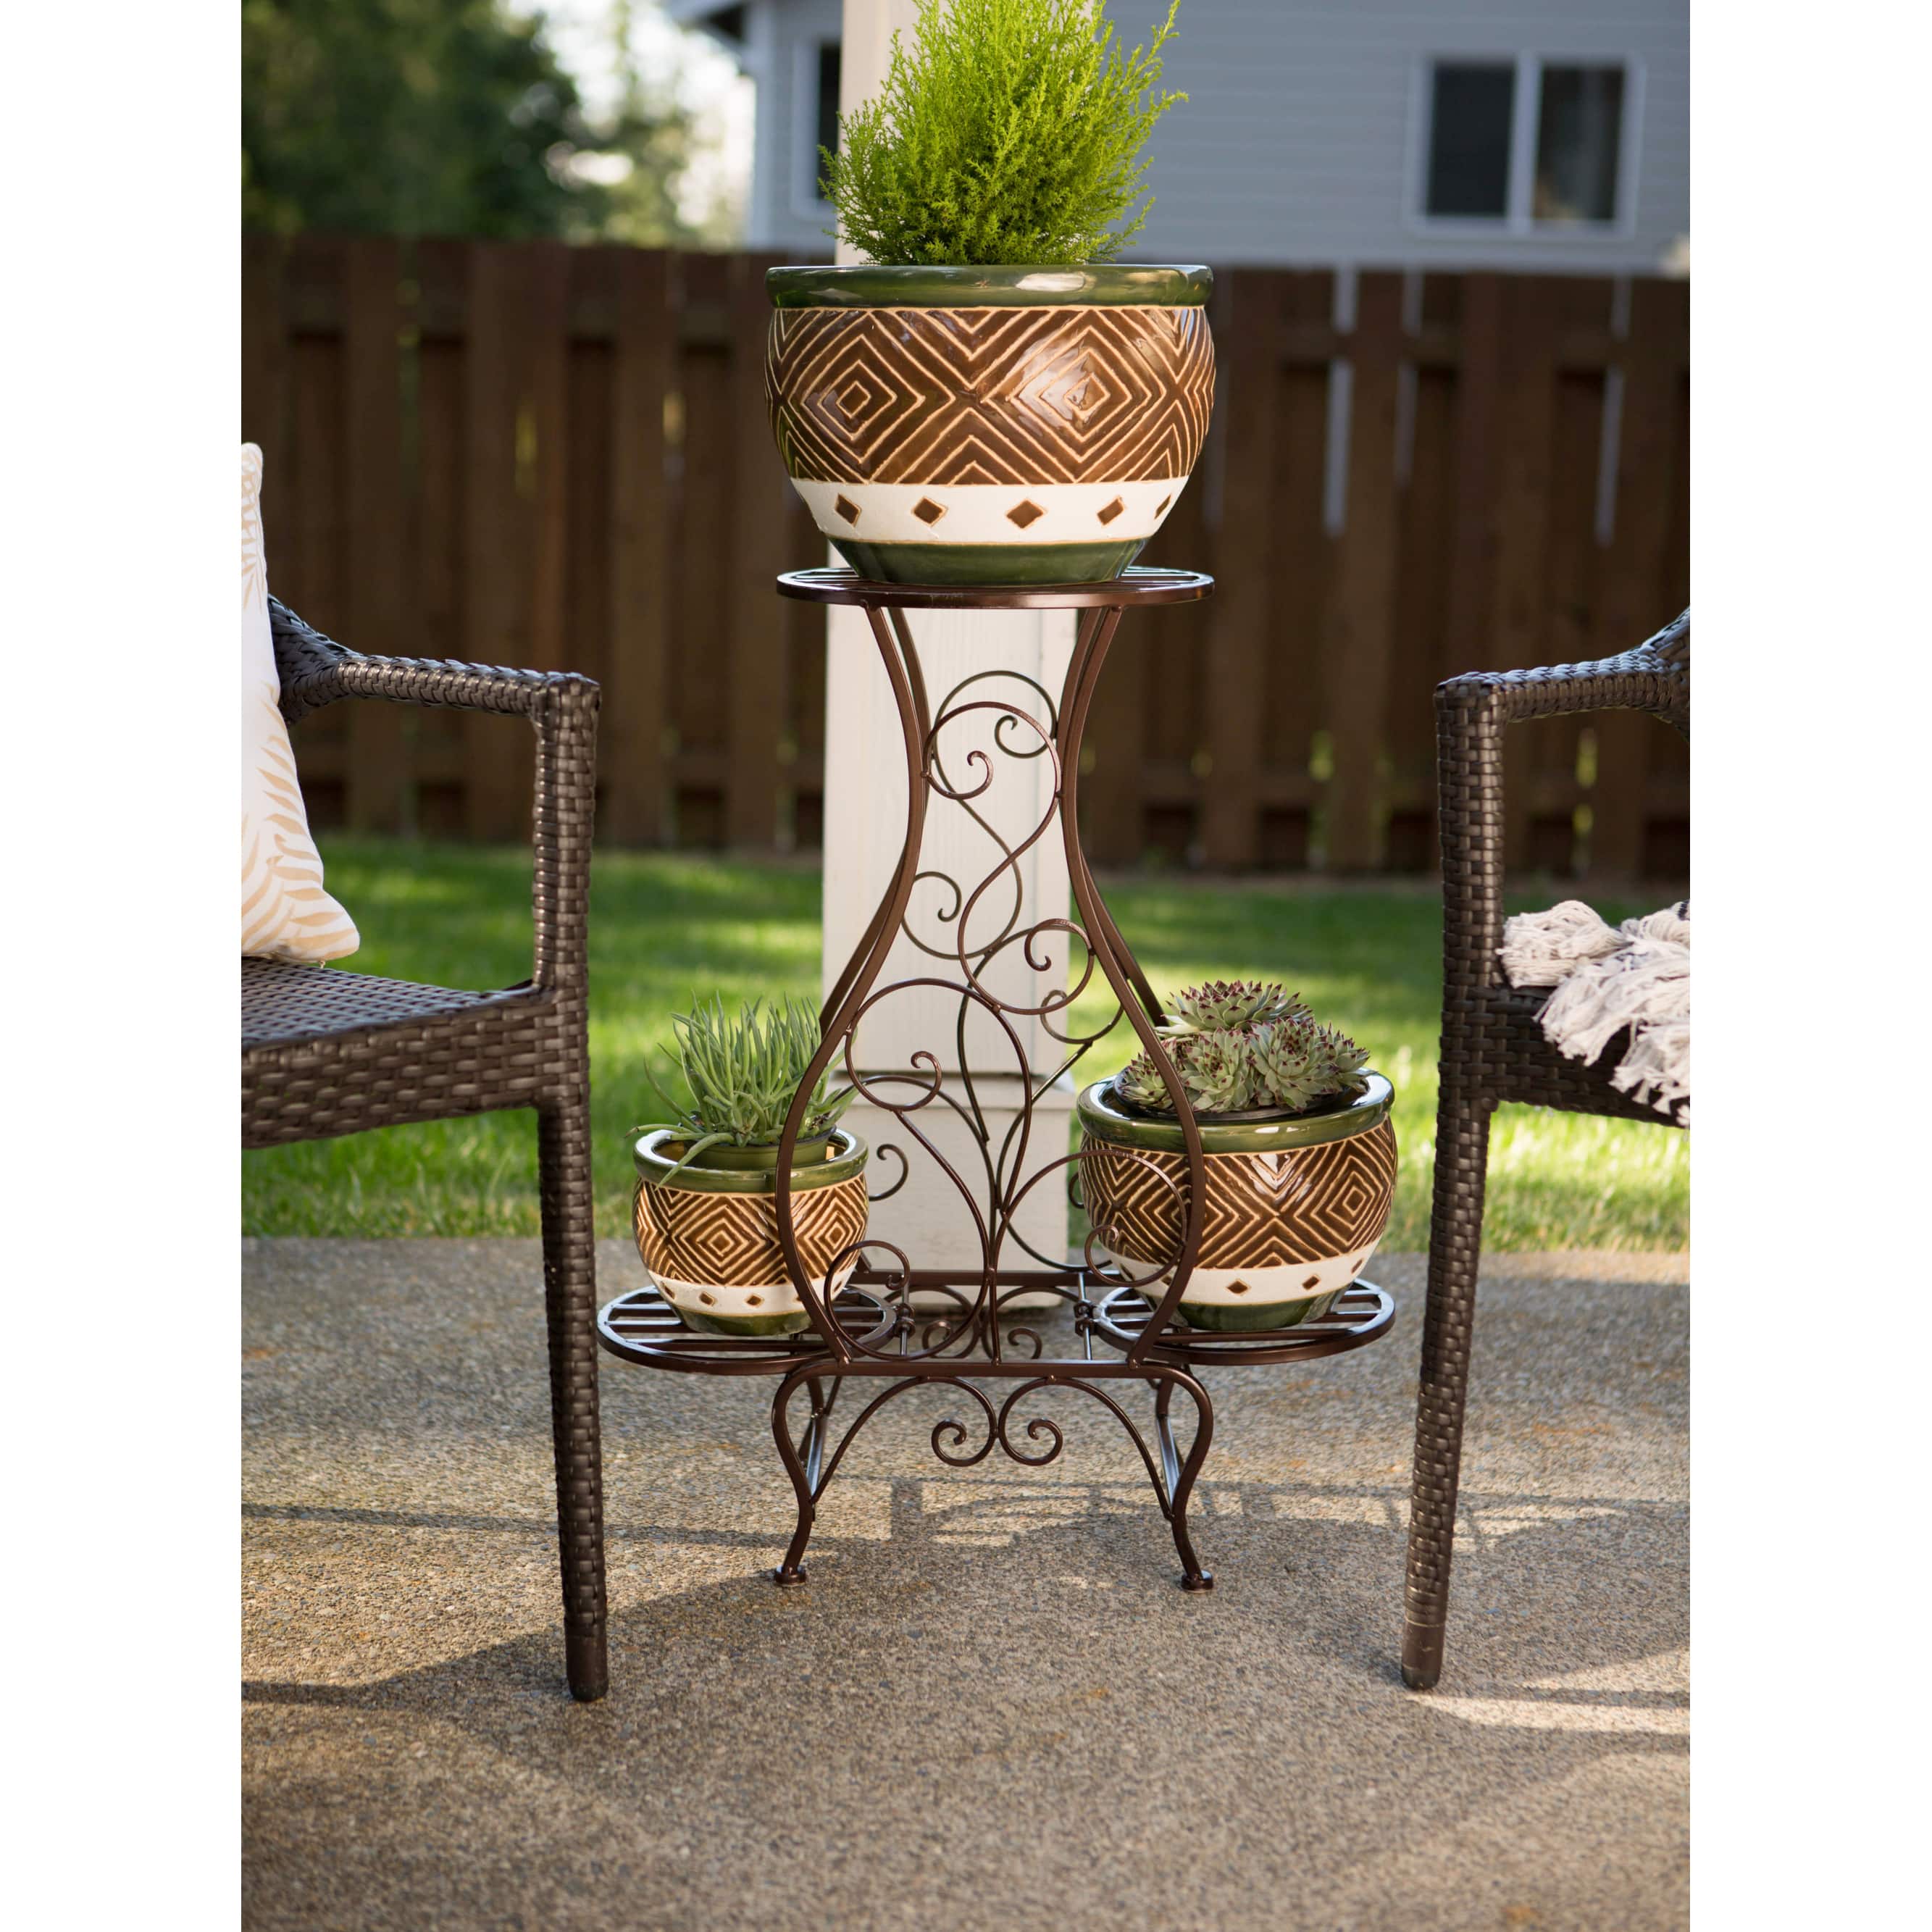 2.2ft. Hourglass Triple Plant Stand